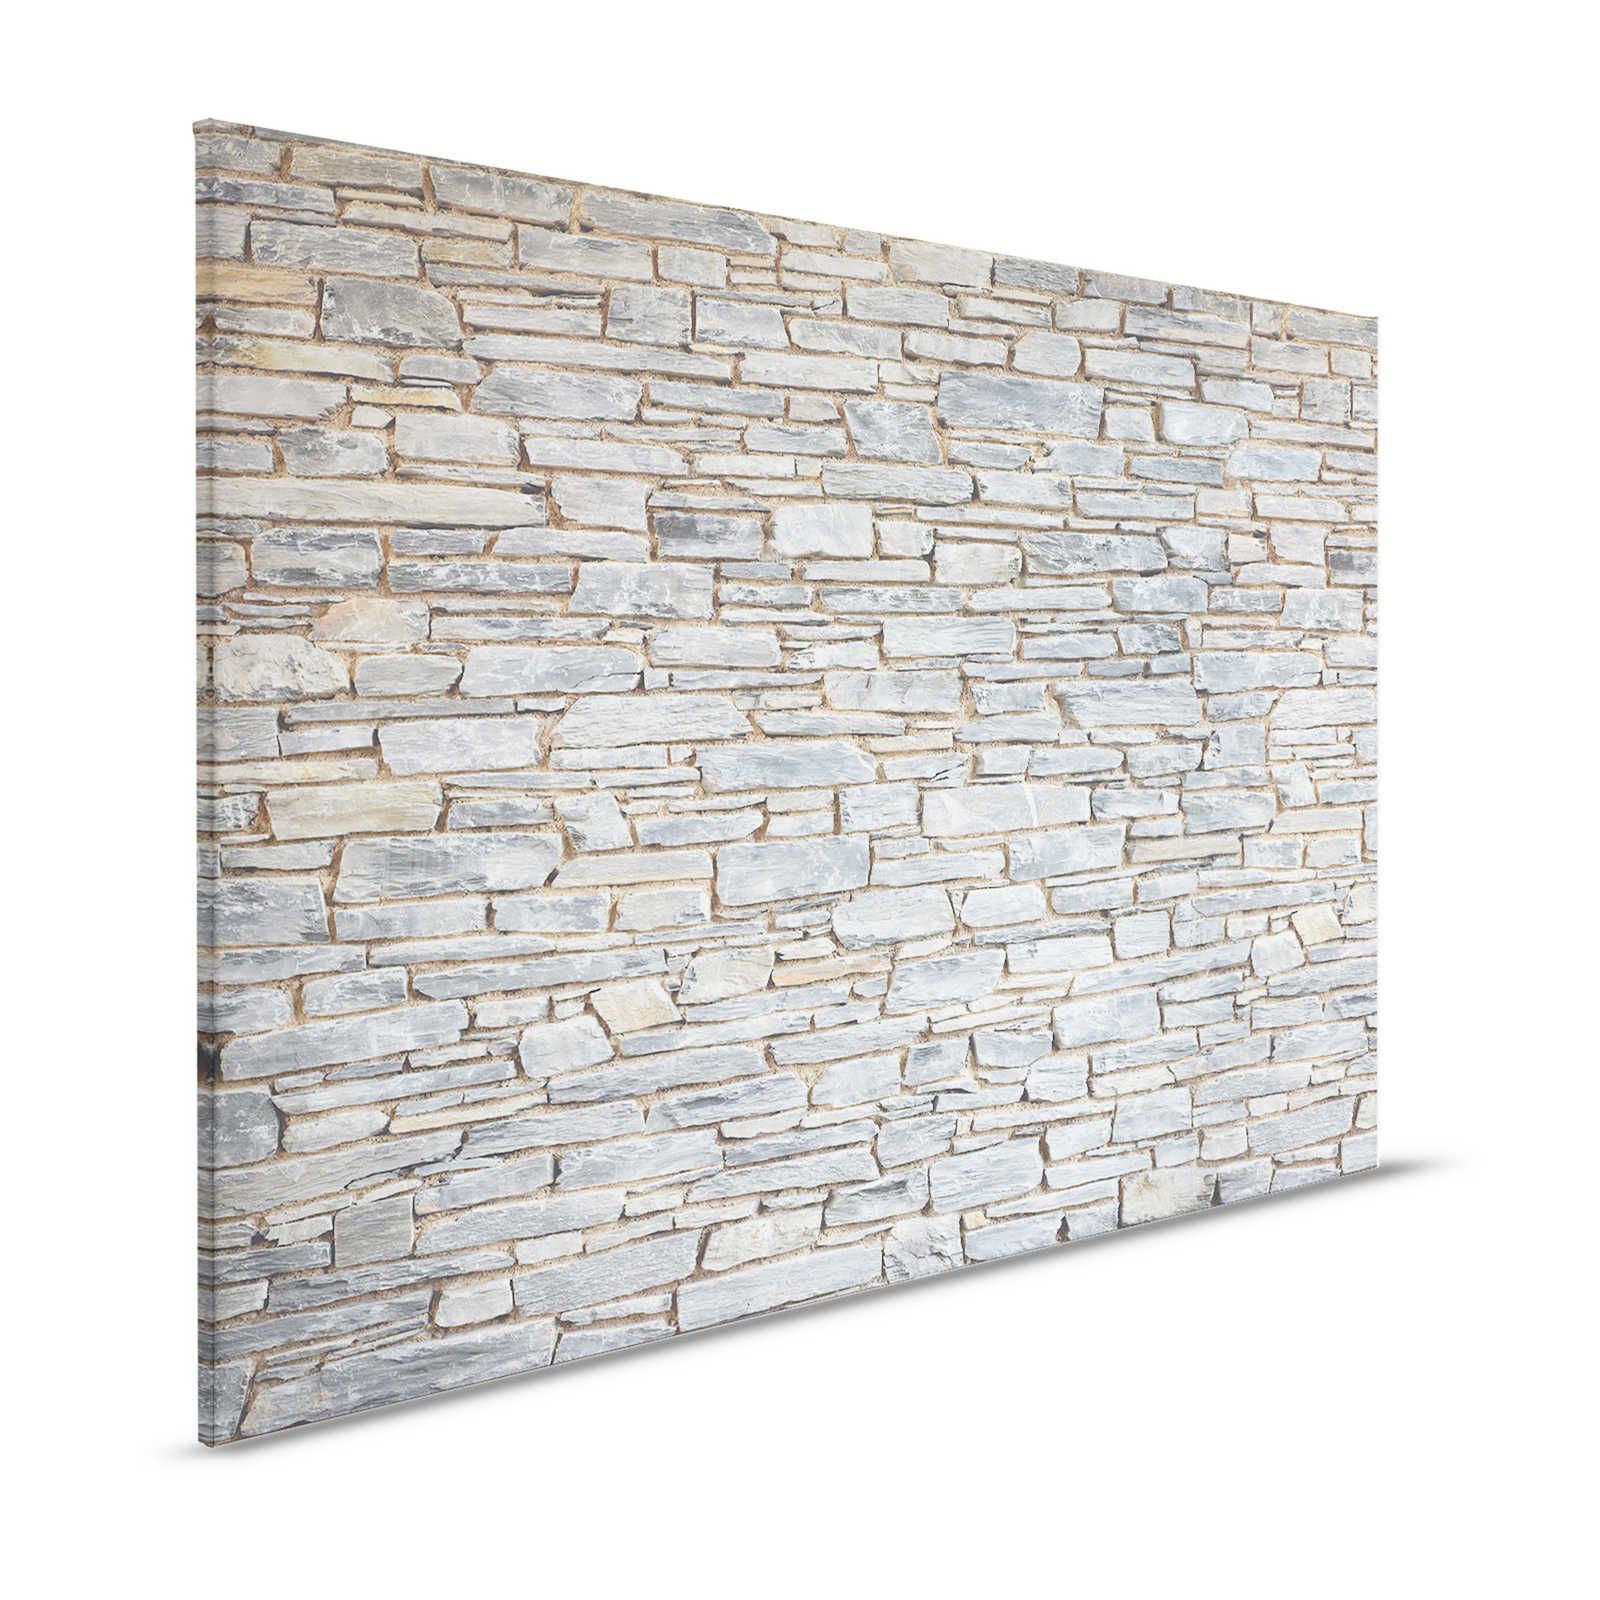 Stone Wall Canvas Painting Light Grey Nature Stone Look - 1.20 m x 0.80 m
